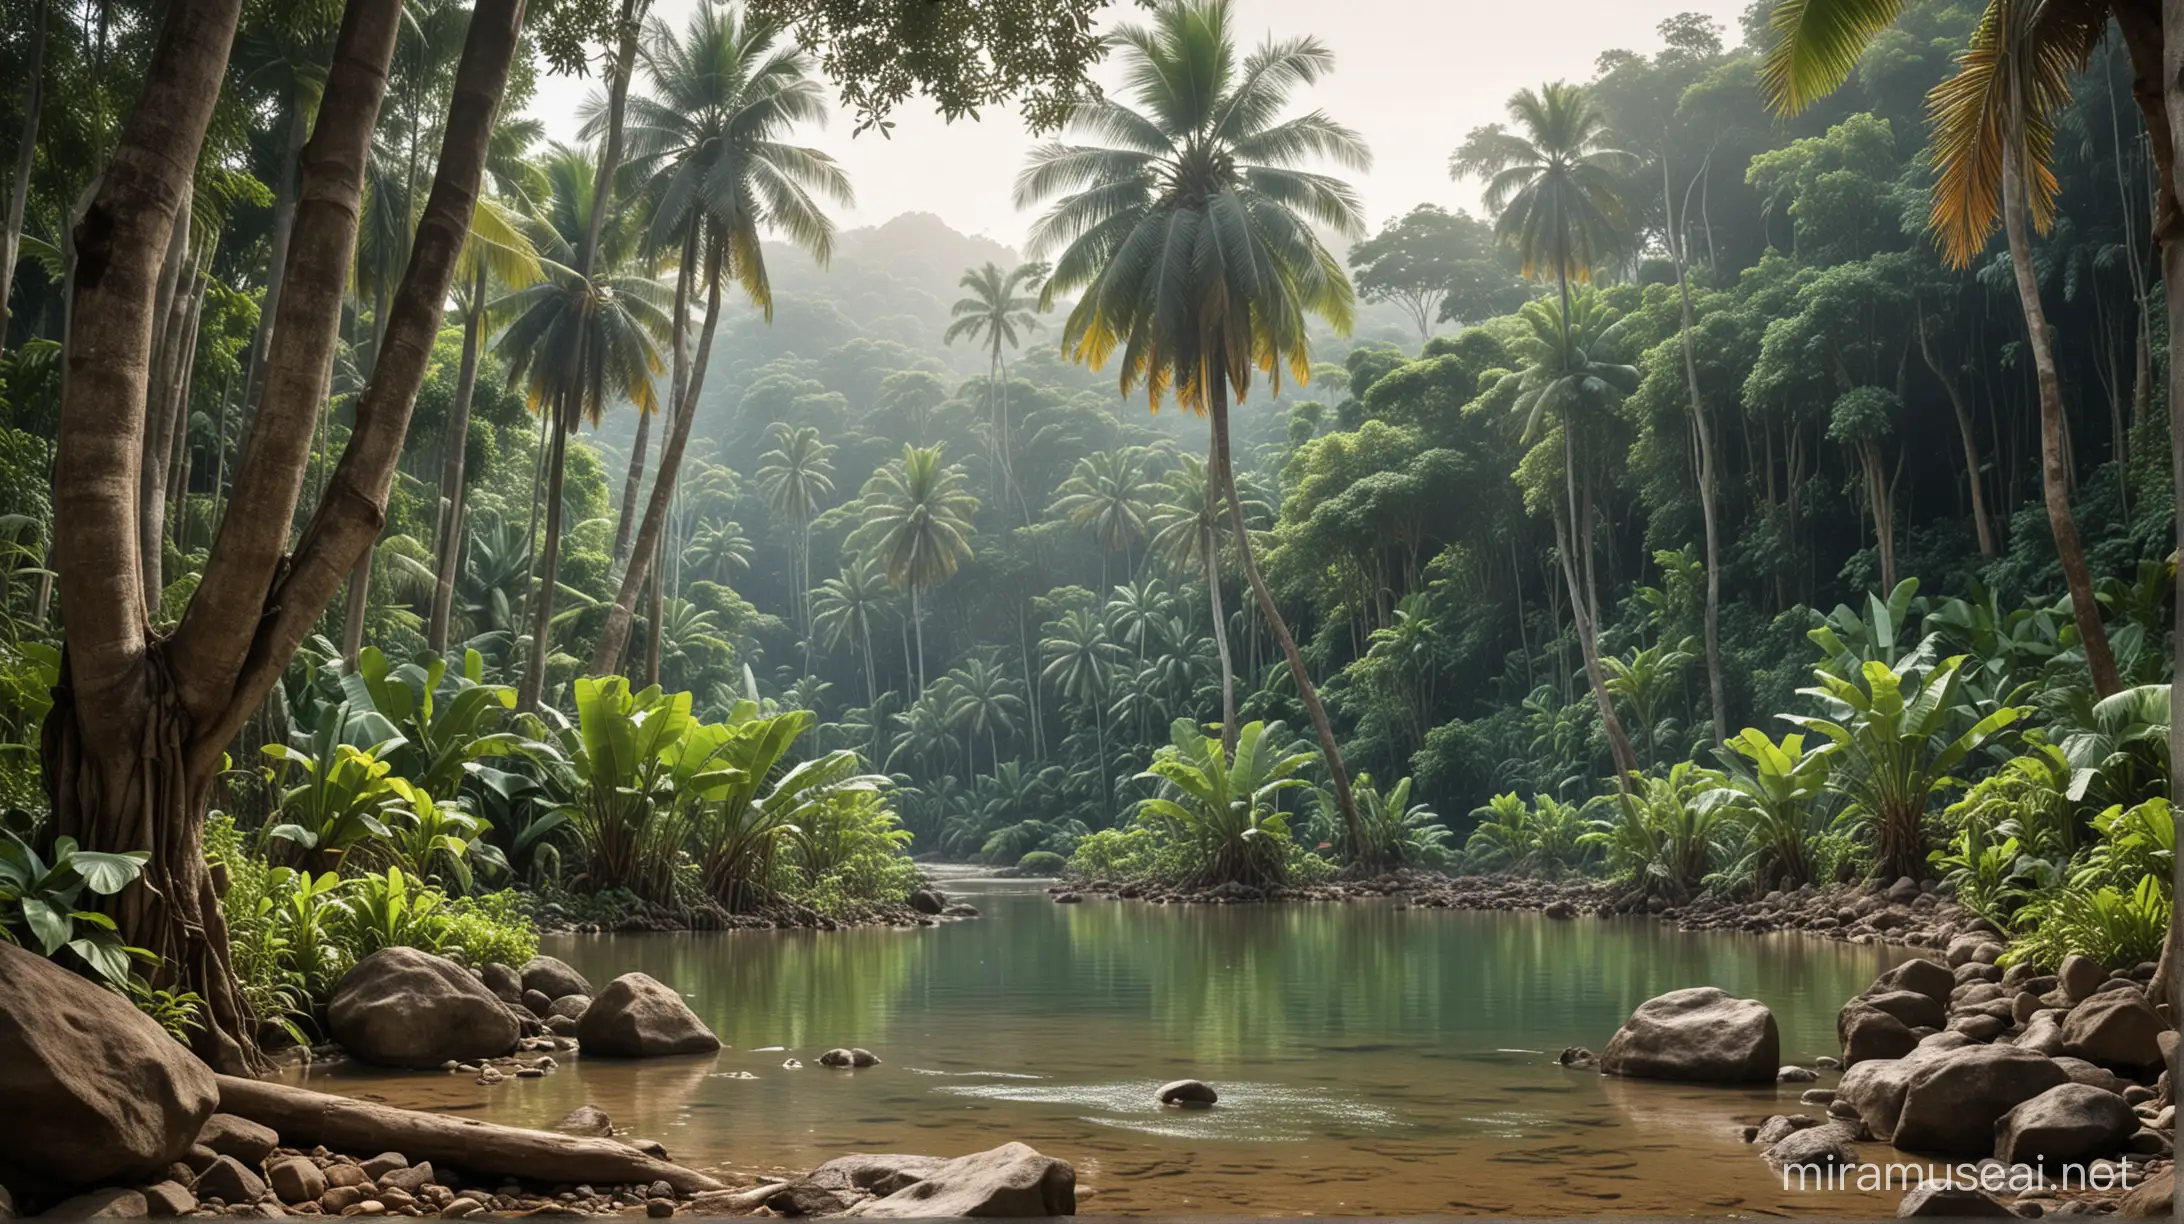 Tranquil Tropical Forest Scene with Waterfall and Banana Trees